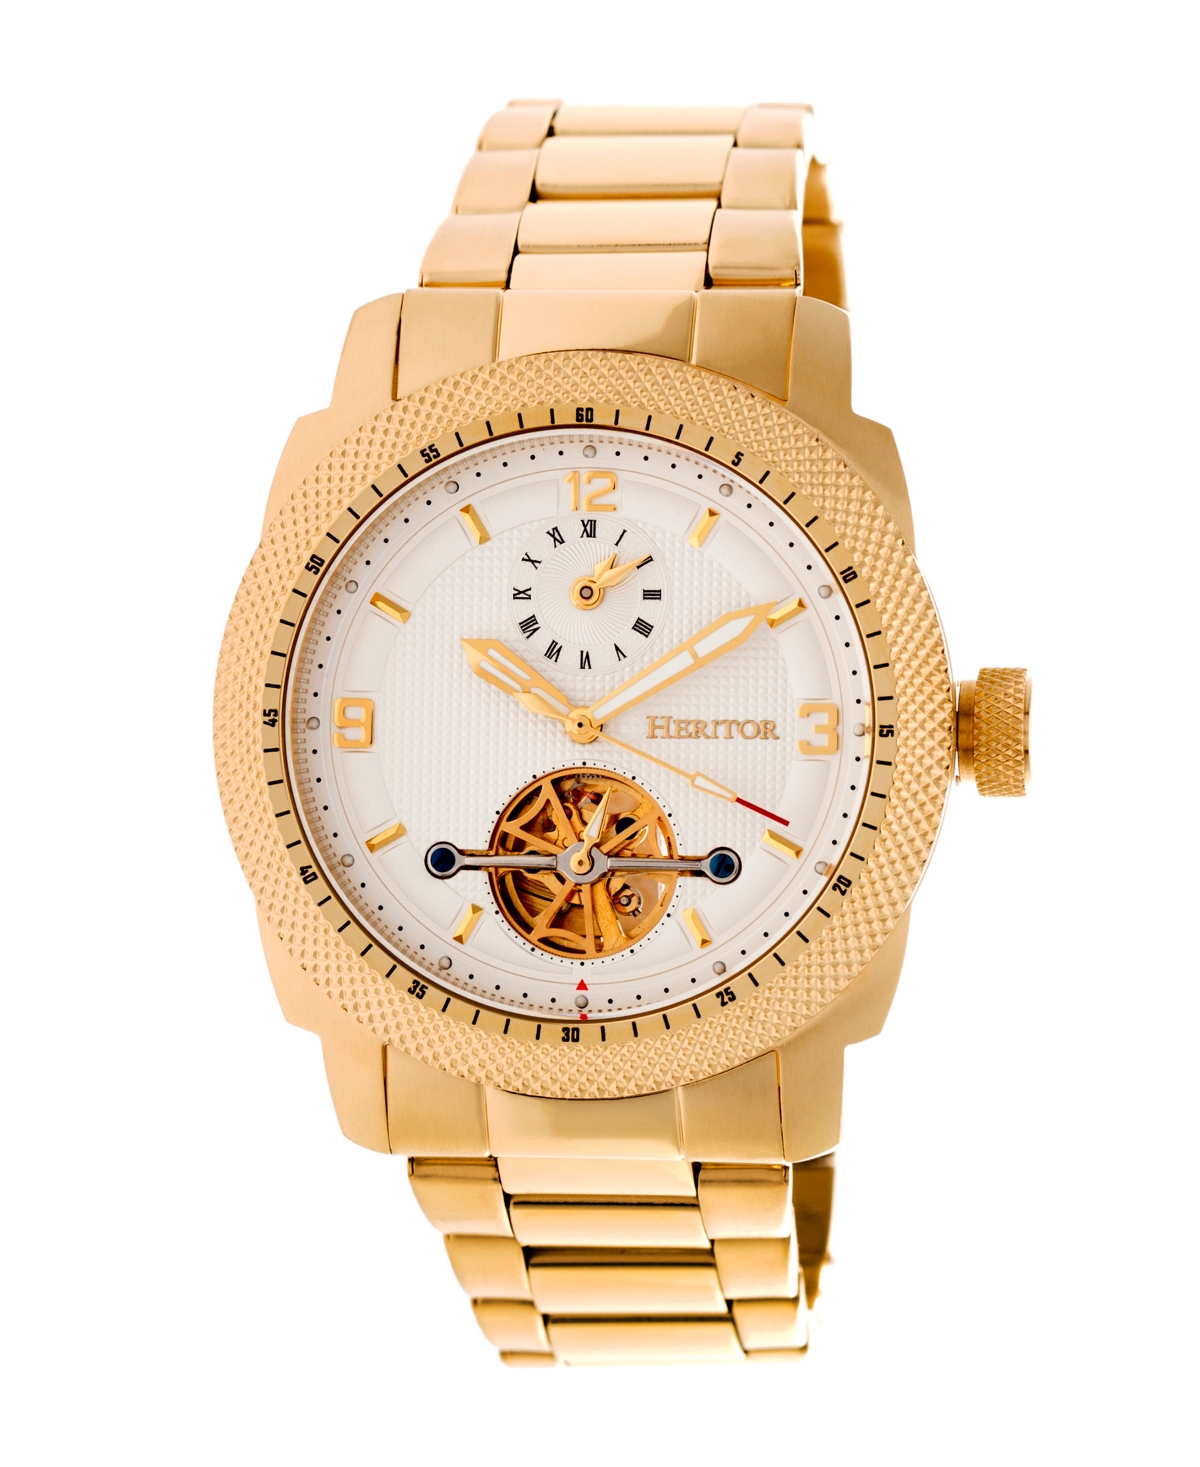 Automatic Helmsley Gold & White Stainless Steel Watches 45mm - Gold